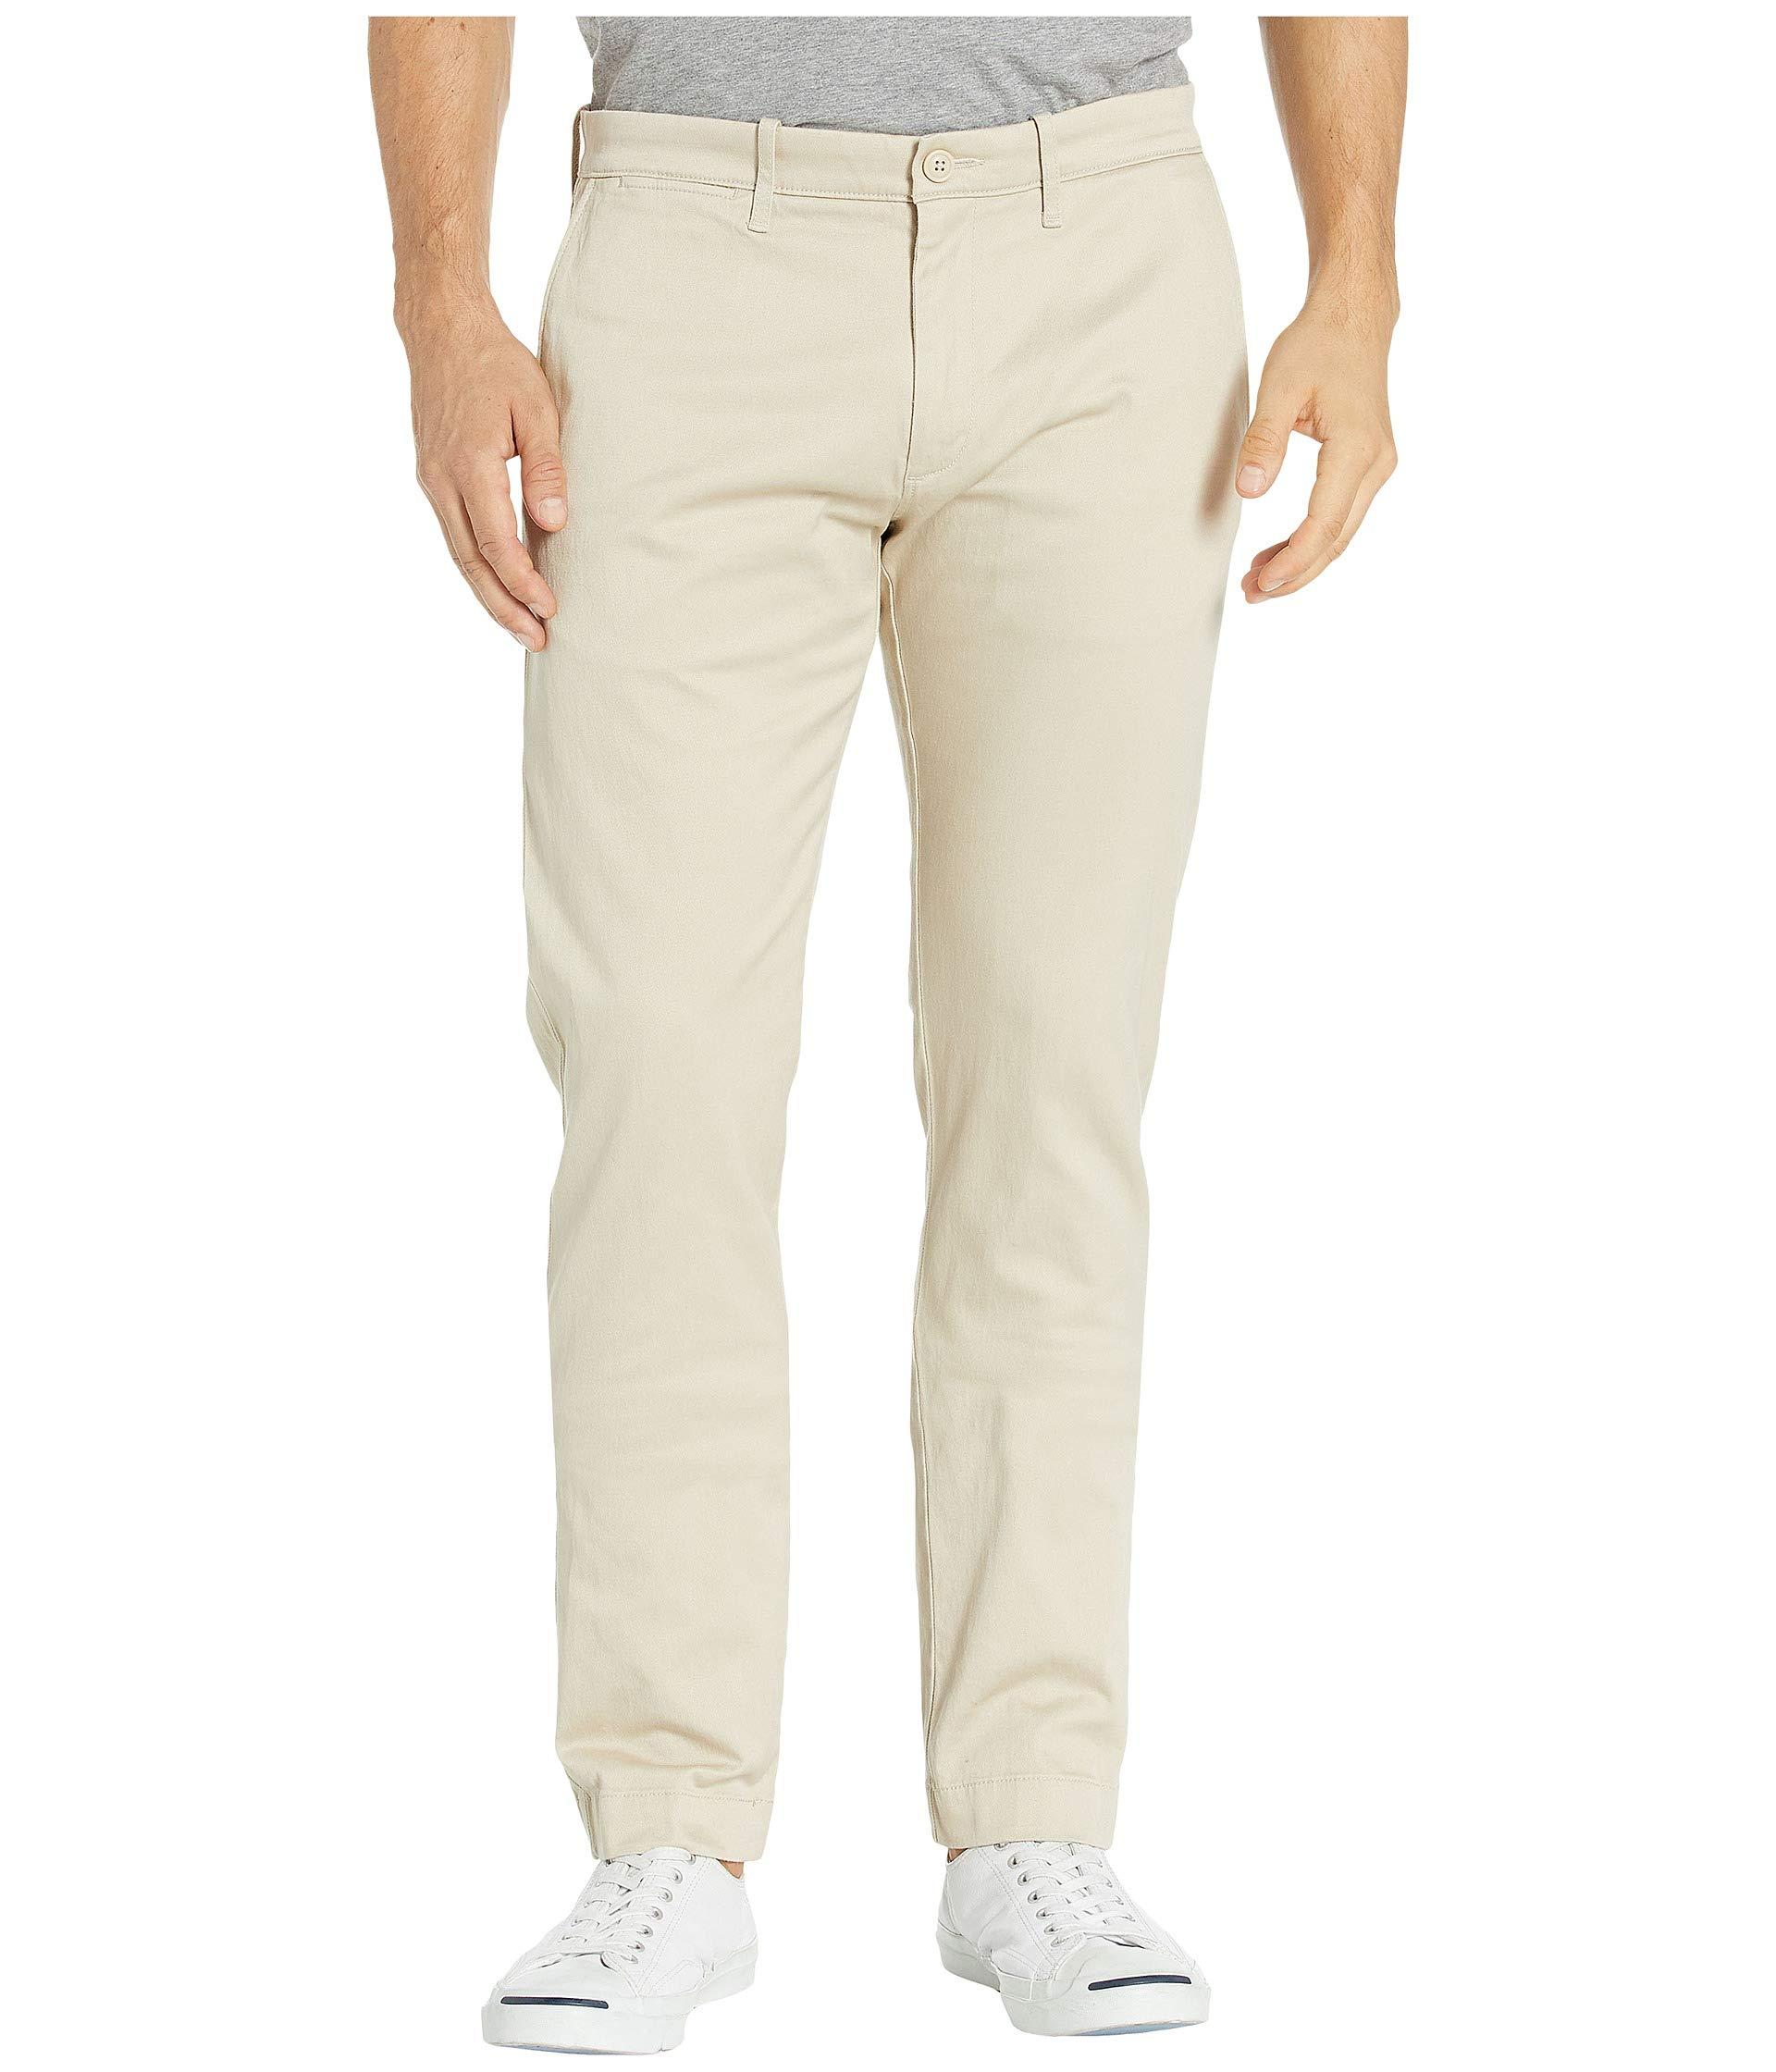 J.Crew Cotton 484 Slim-fit Pant In Stretch Chino in White for Men - Lyst